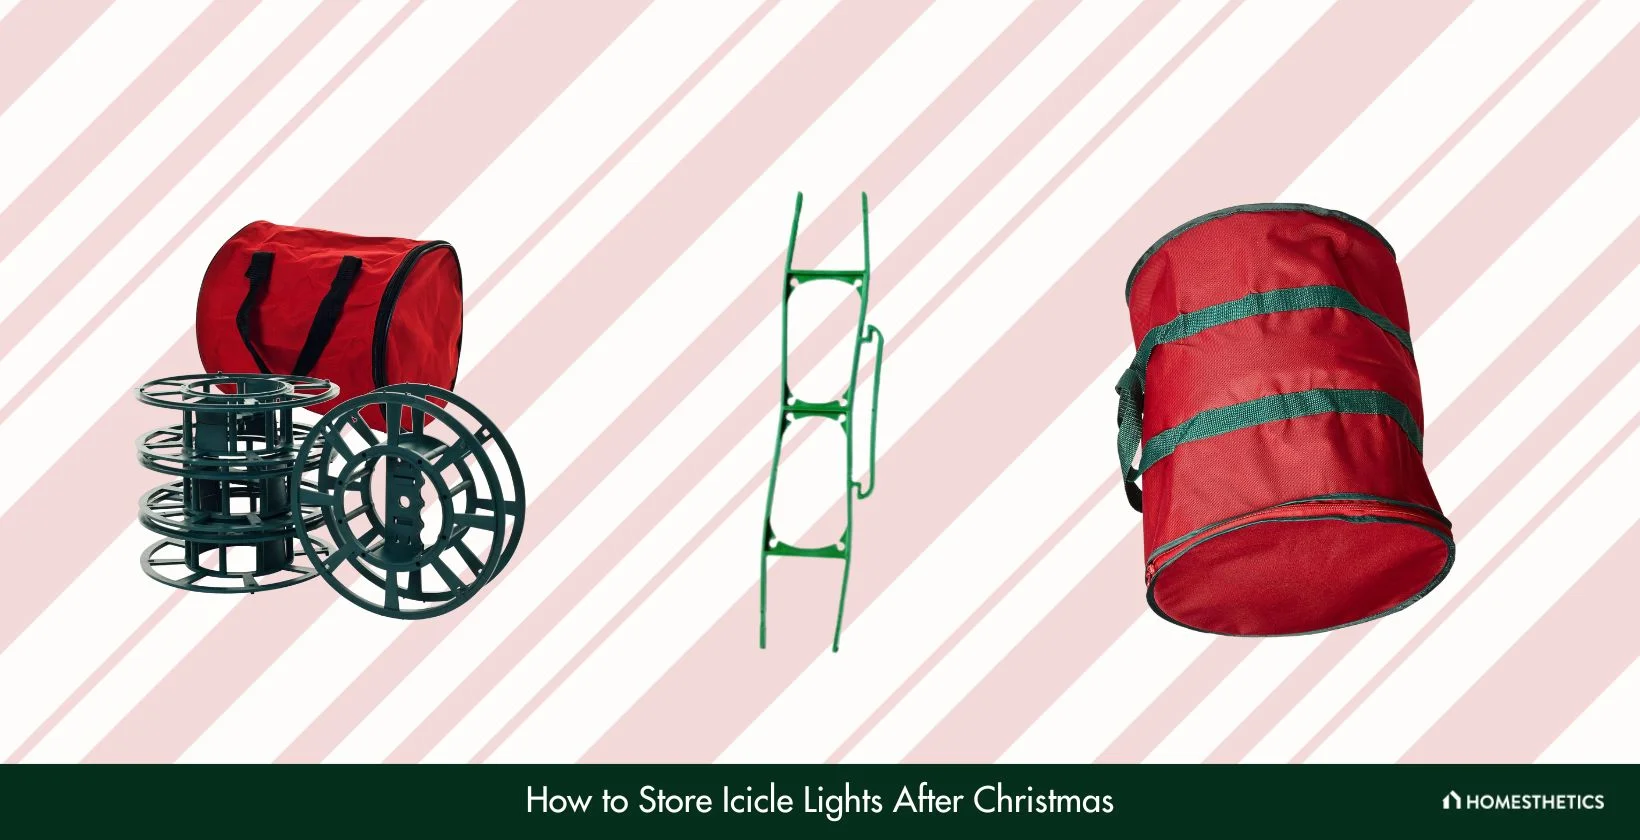 How to Store Icicle Lights After Christmas